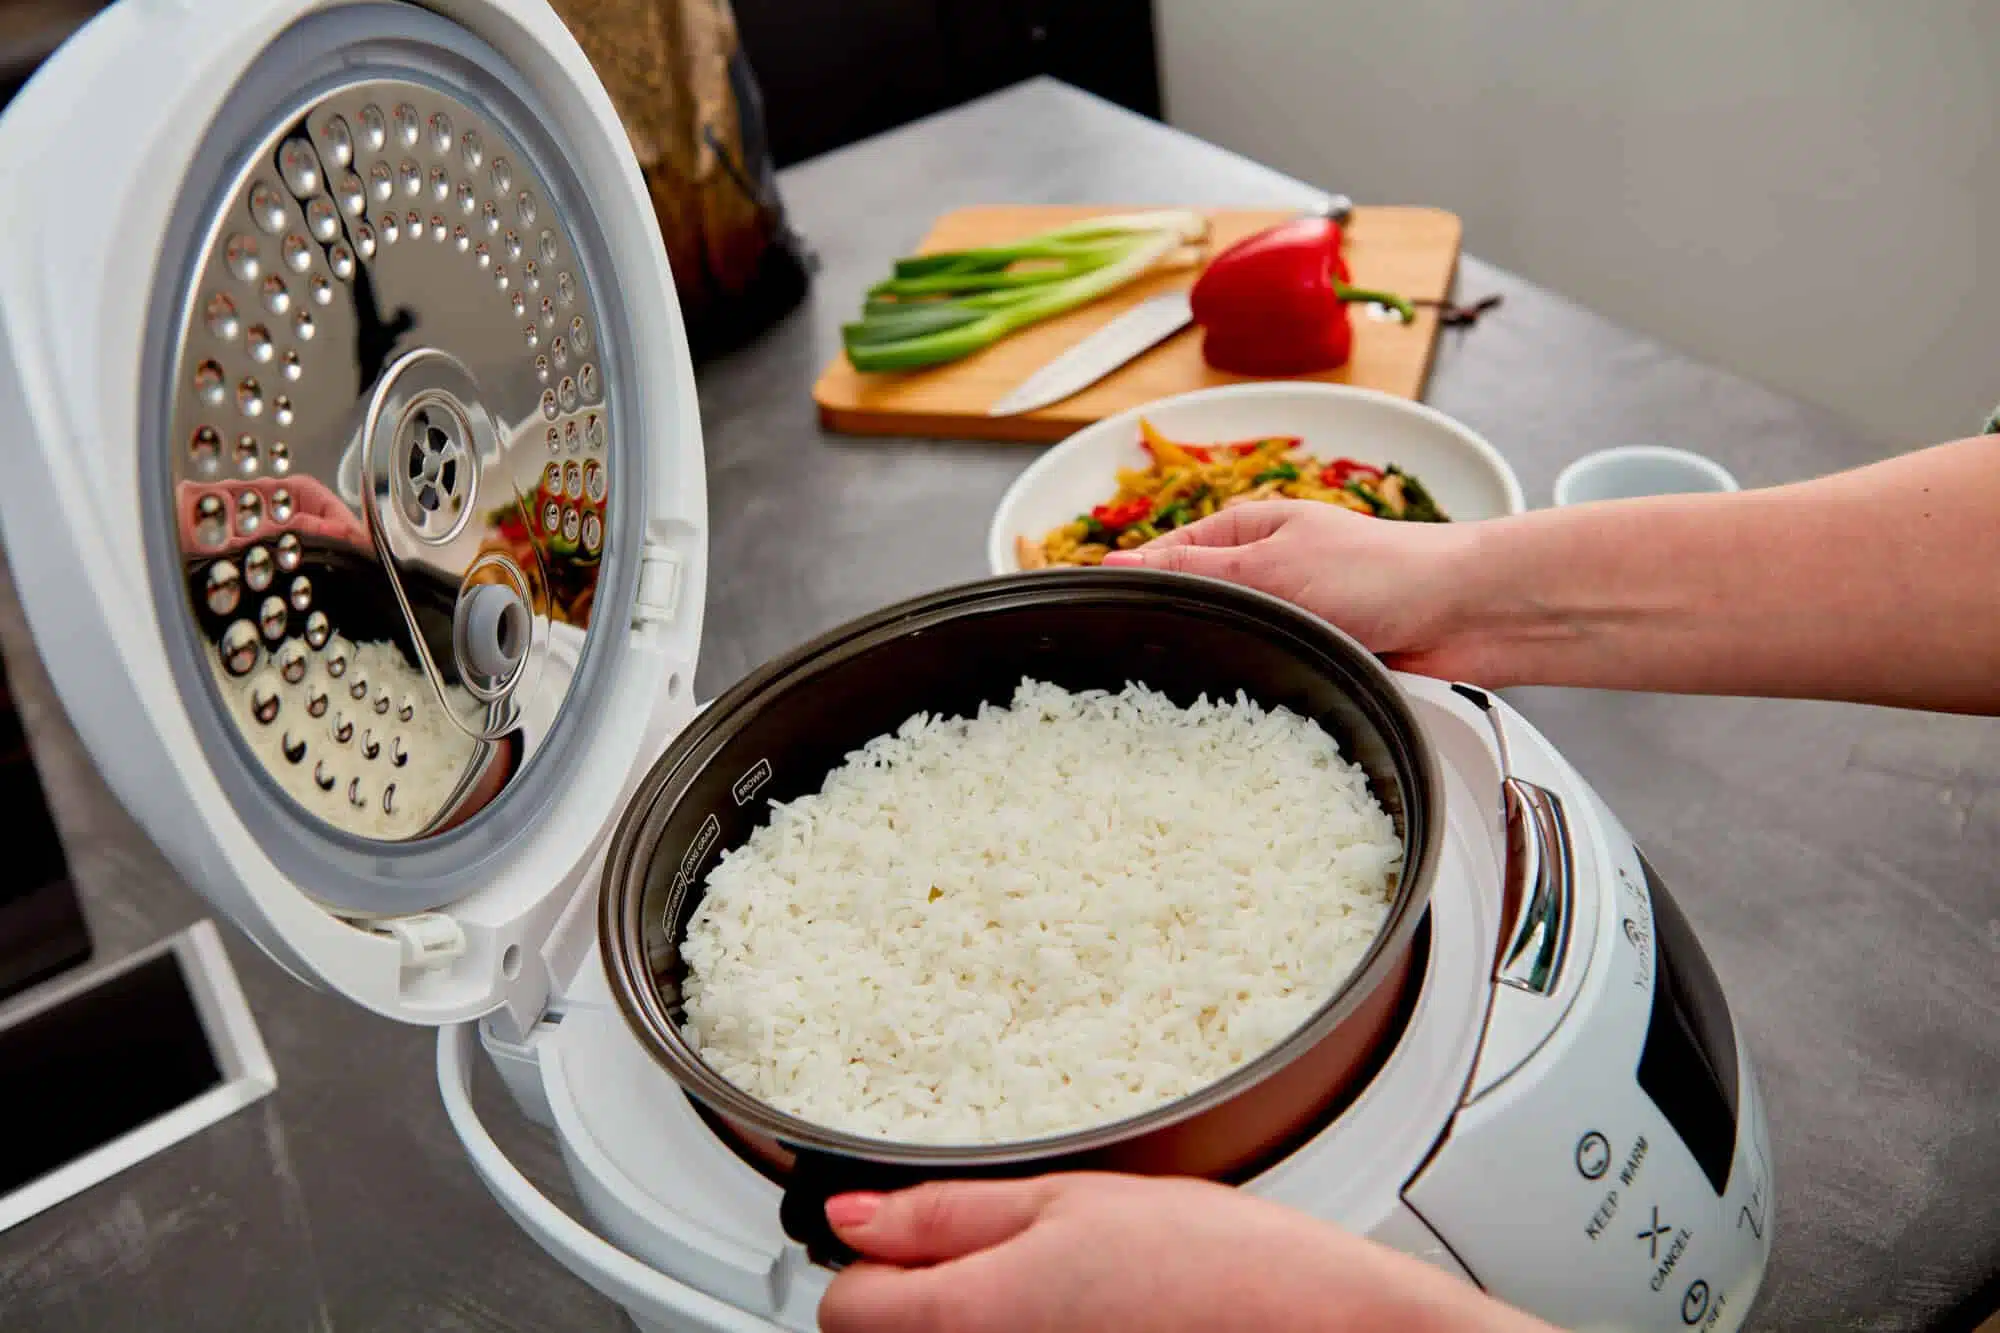 Sticky Rice Hacks: Easy Recipes with Aroma Rice Cooker